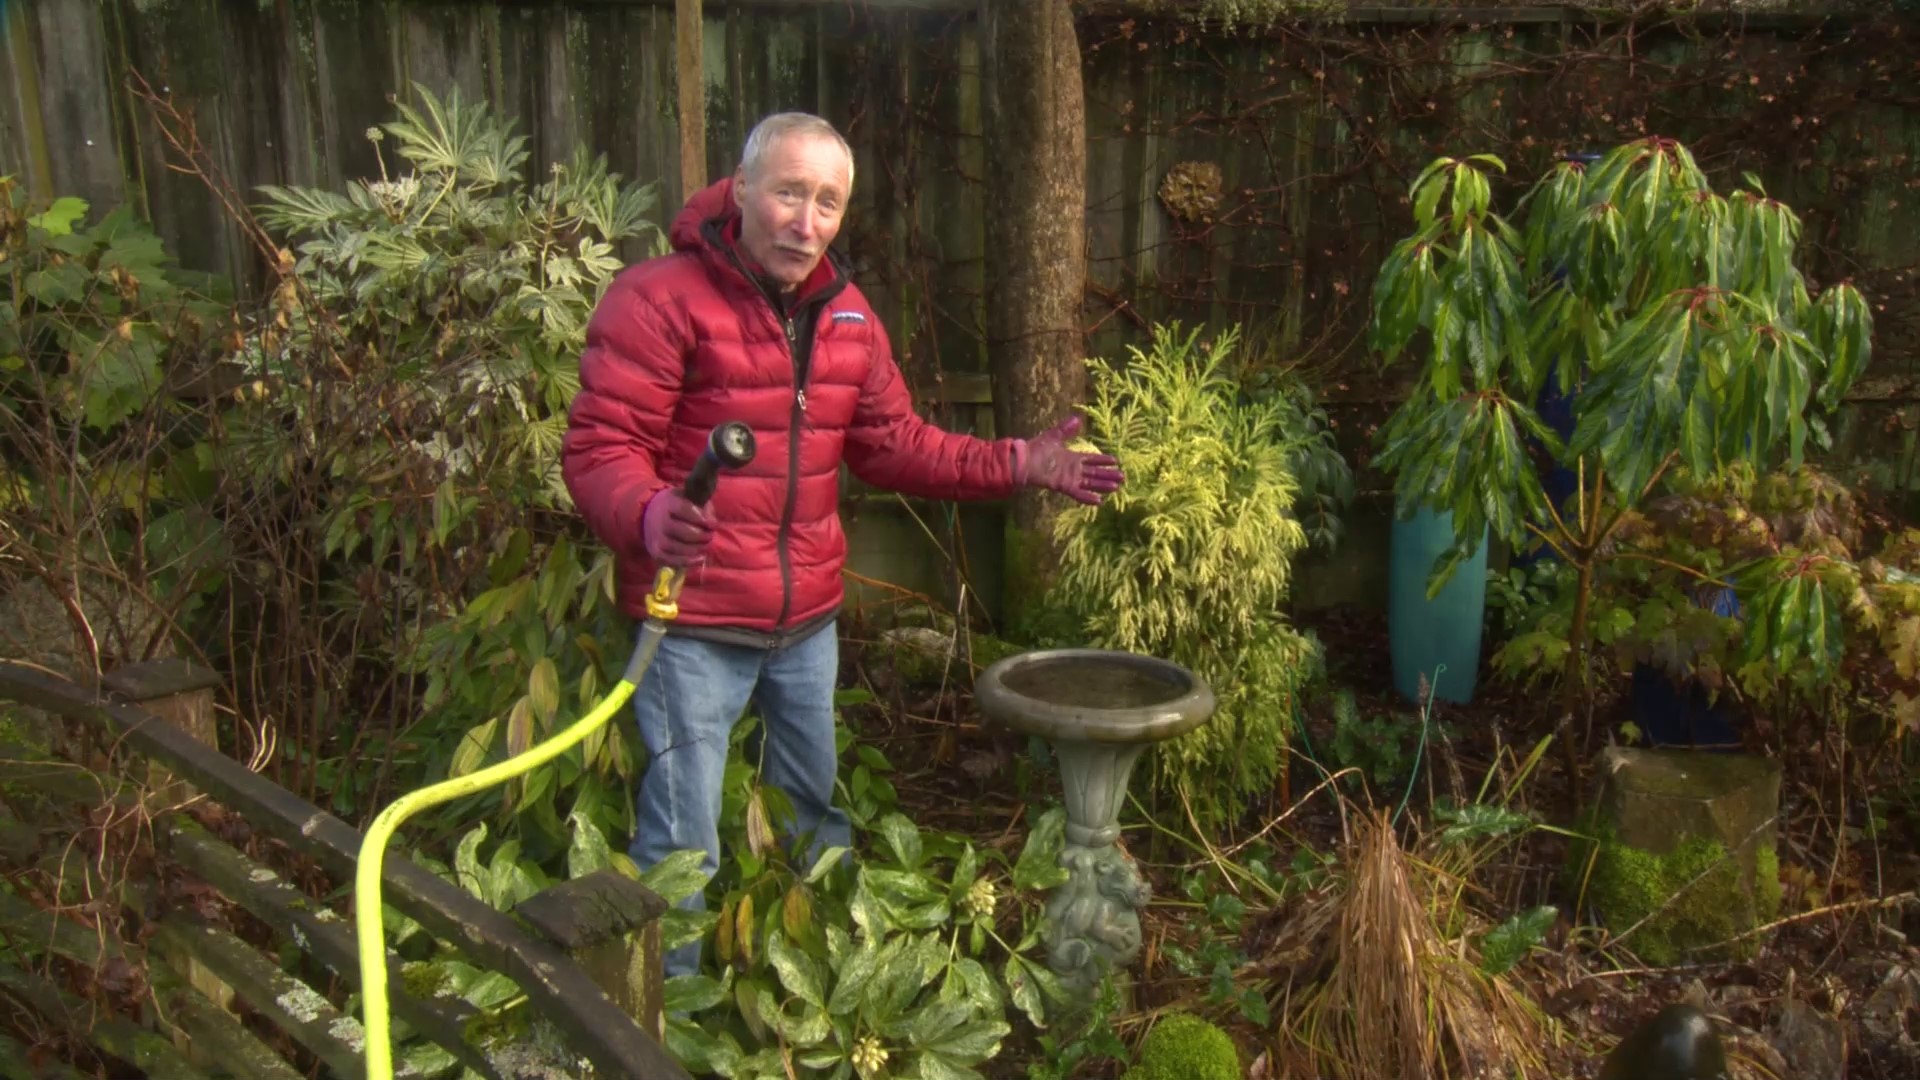 Stop feeding rats and make feathered friends happy with a simple garden addition. #k5evening